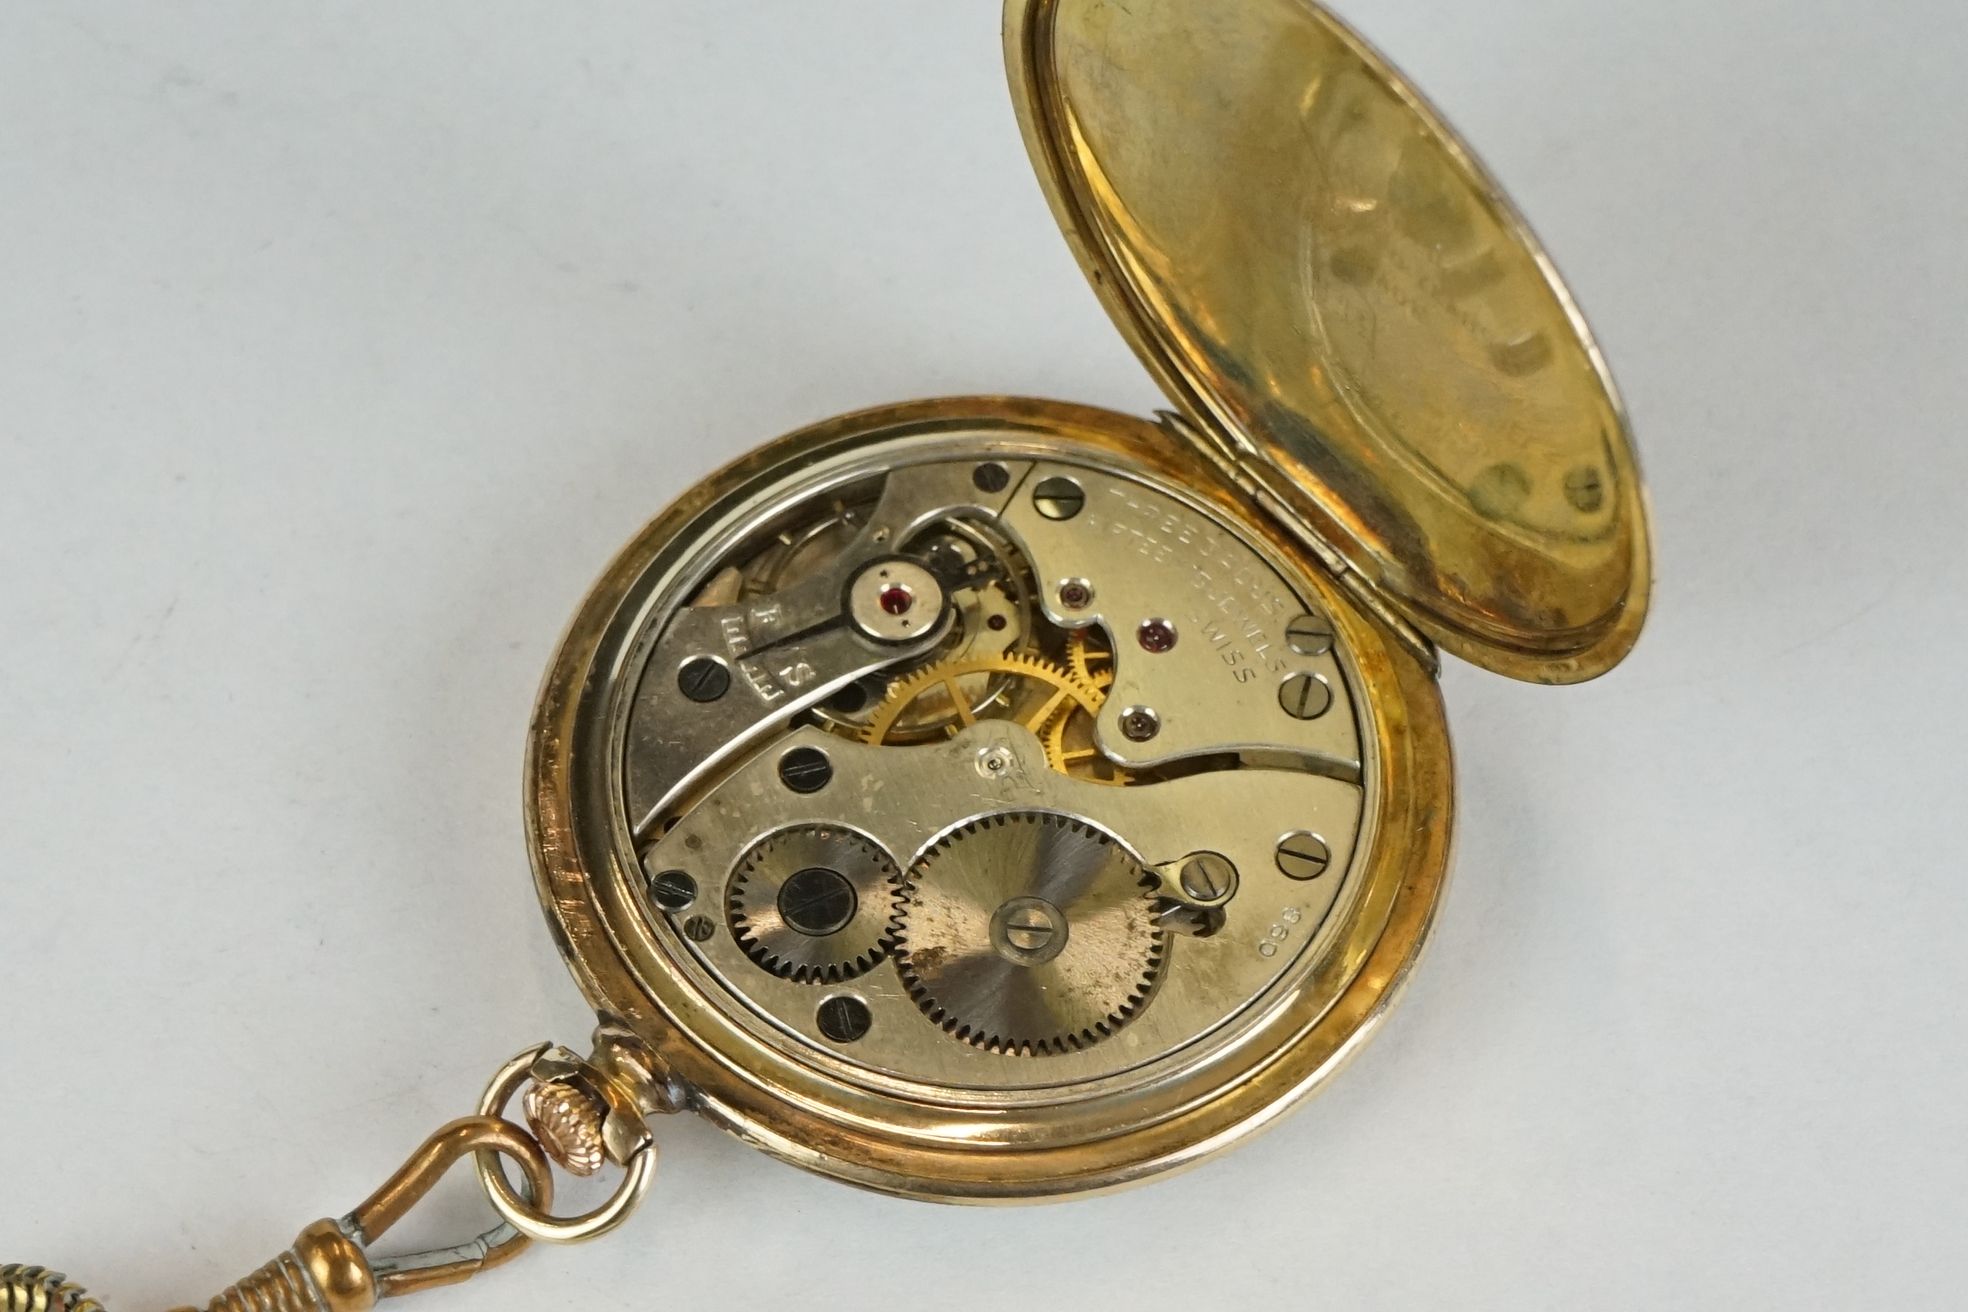 Rolled gold open faced Citadel pocket watch with gilt Albert chain - Image 4 of 5